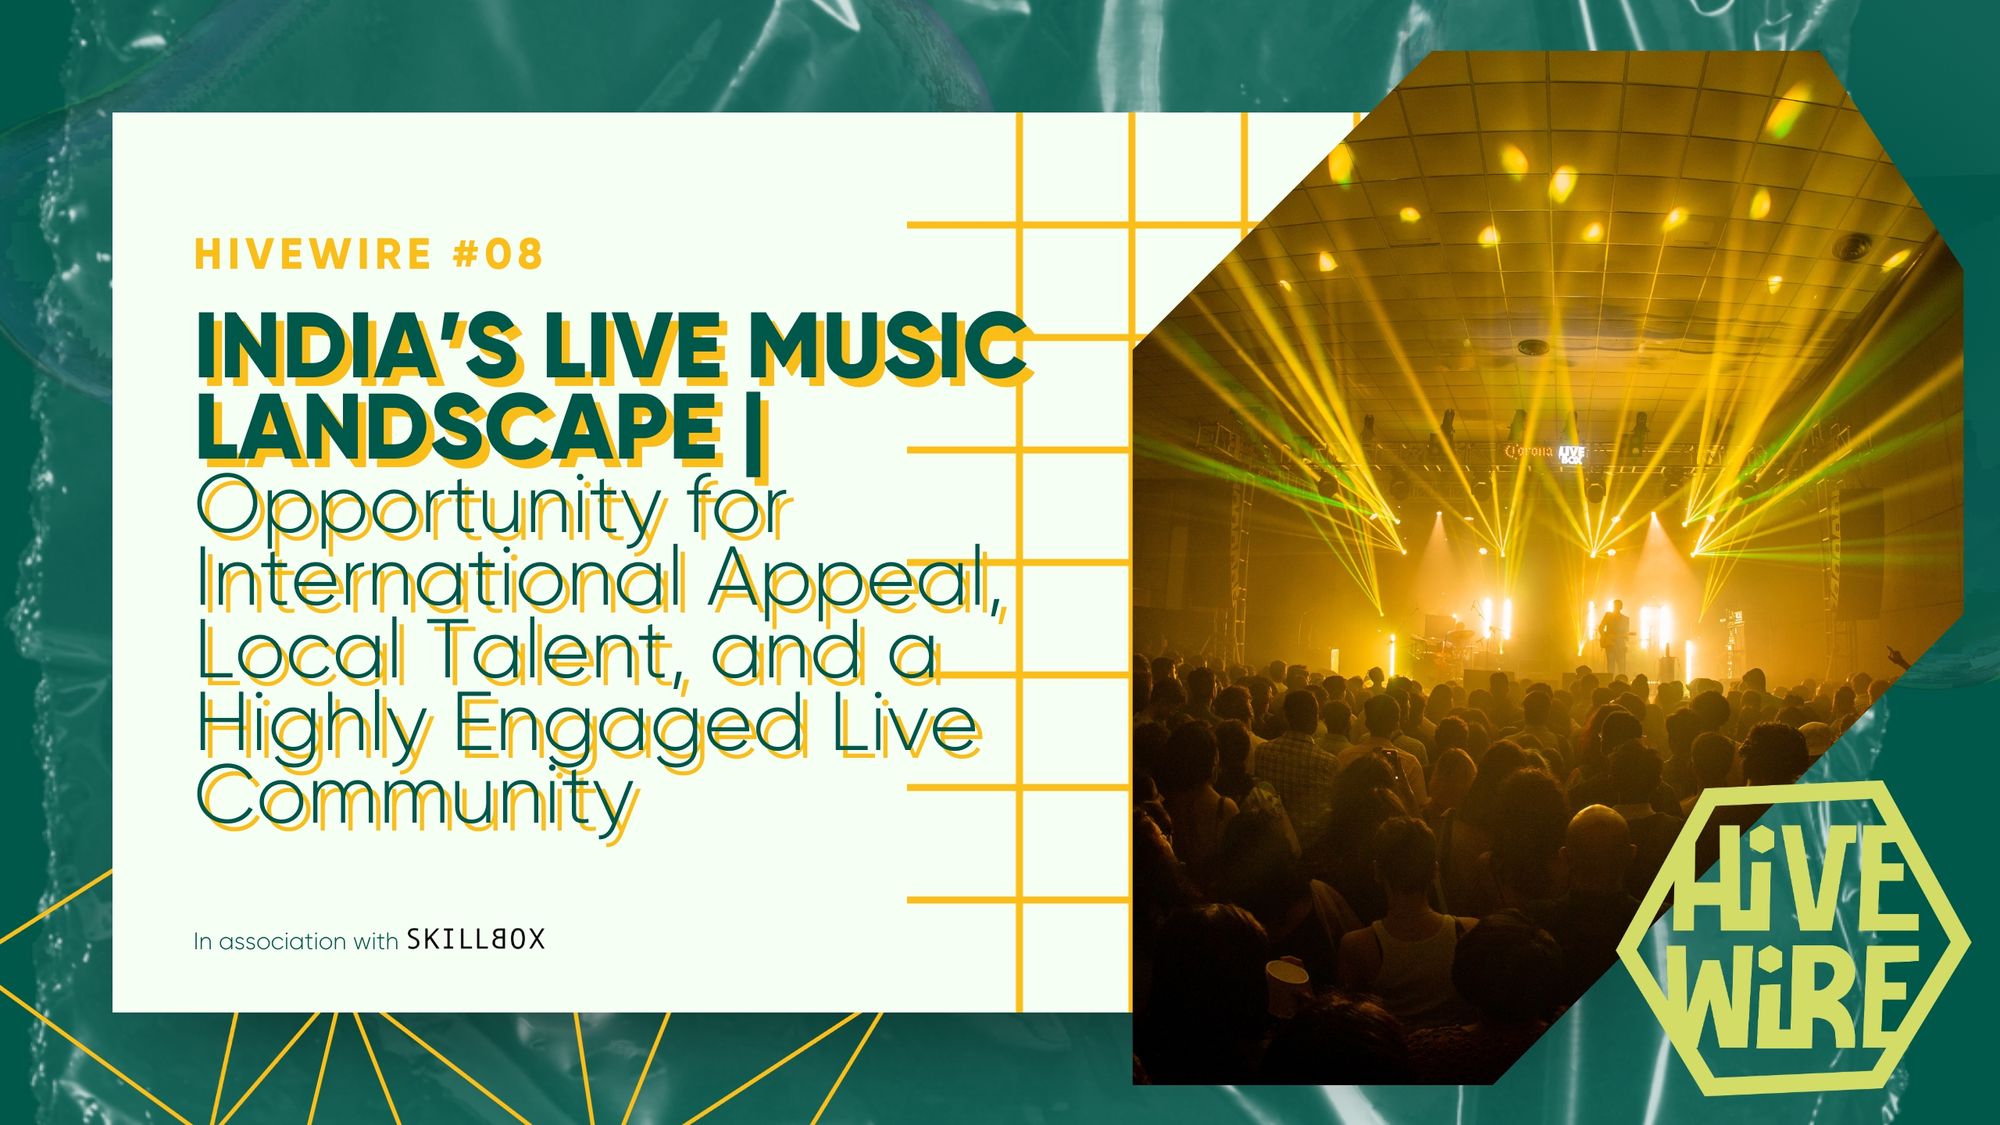 HIVEWIRE #08: India’s Live Music Landscape | Opportunity for International Appeal, Local Talent, and a Highly Engaged Live Community